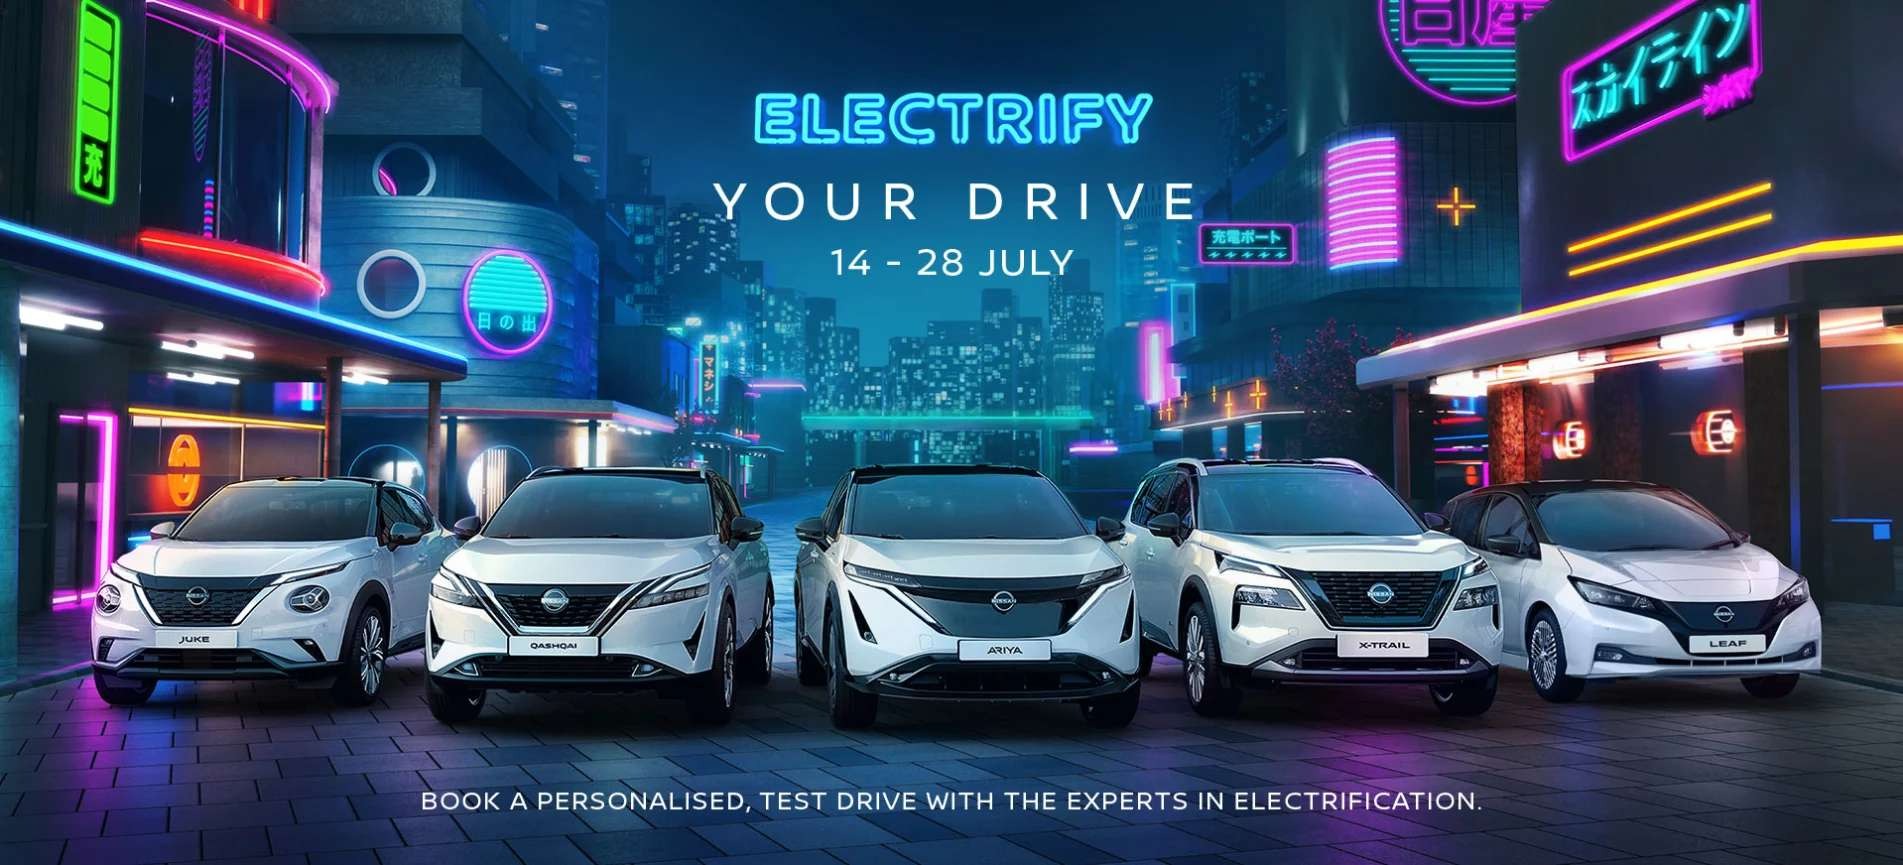 Electrify Your Drive Event